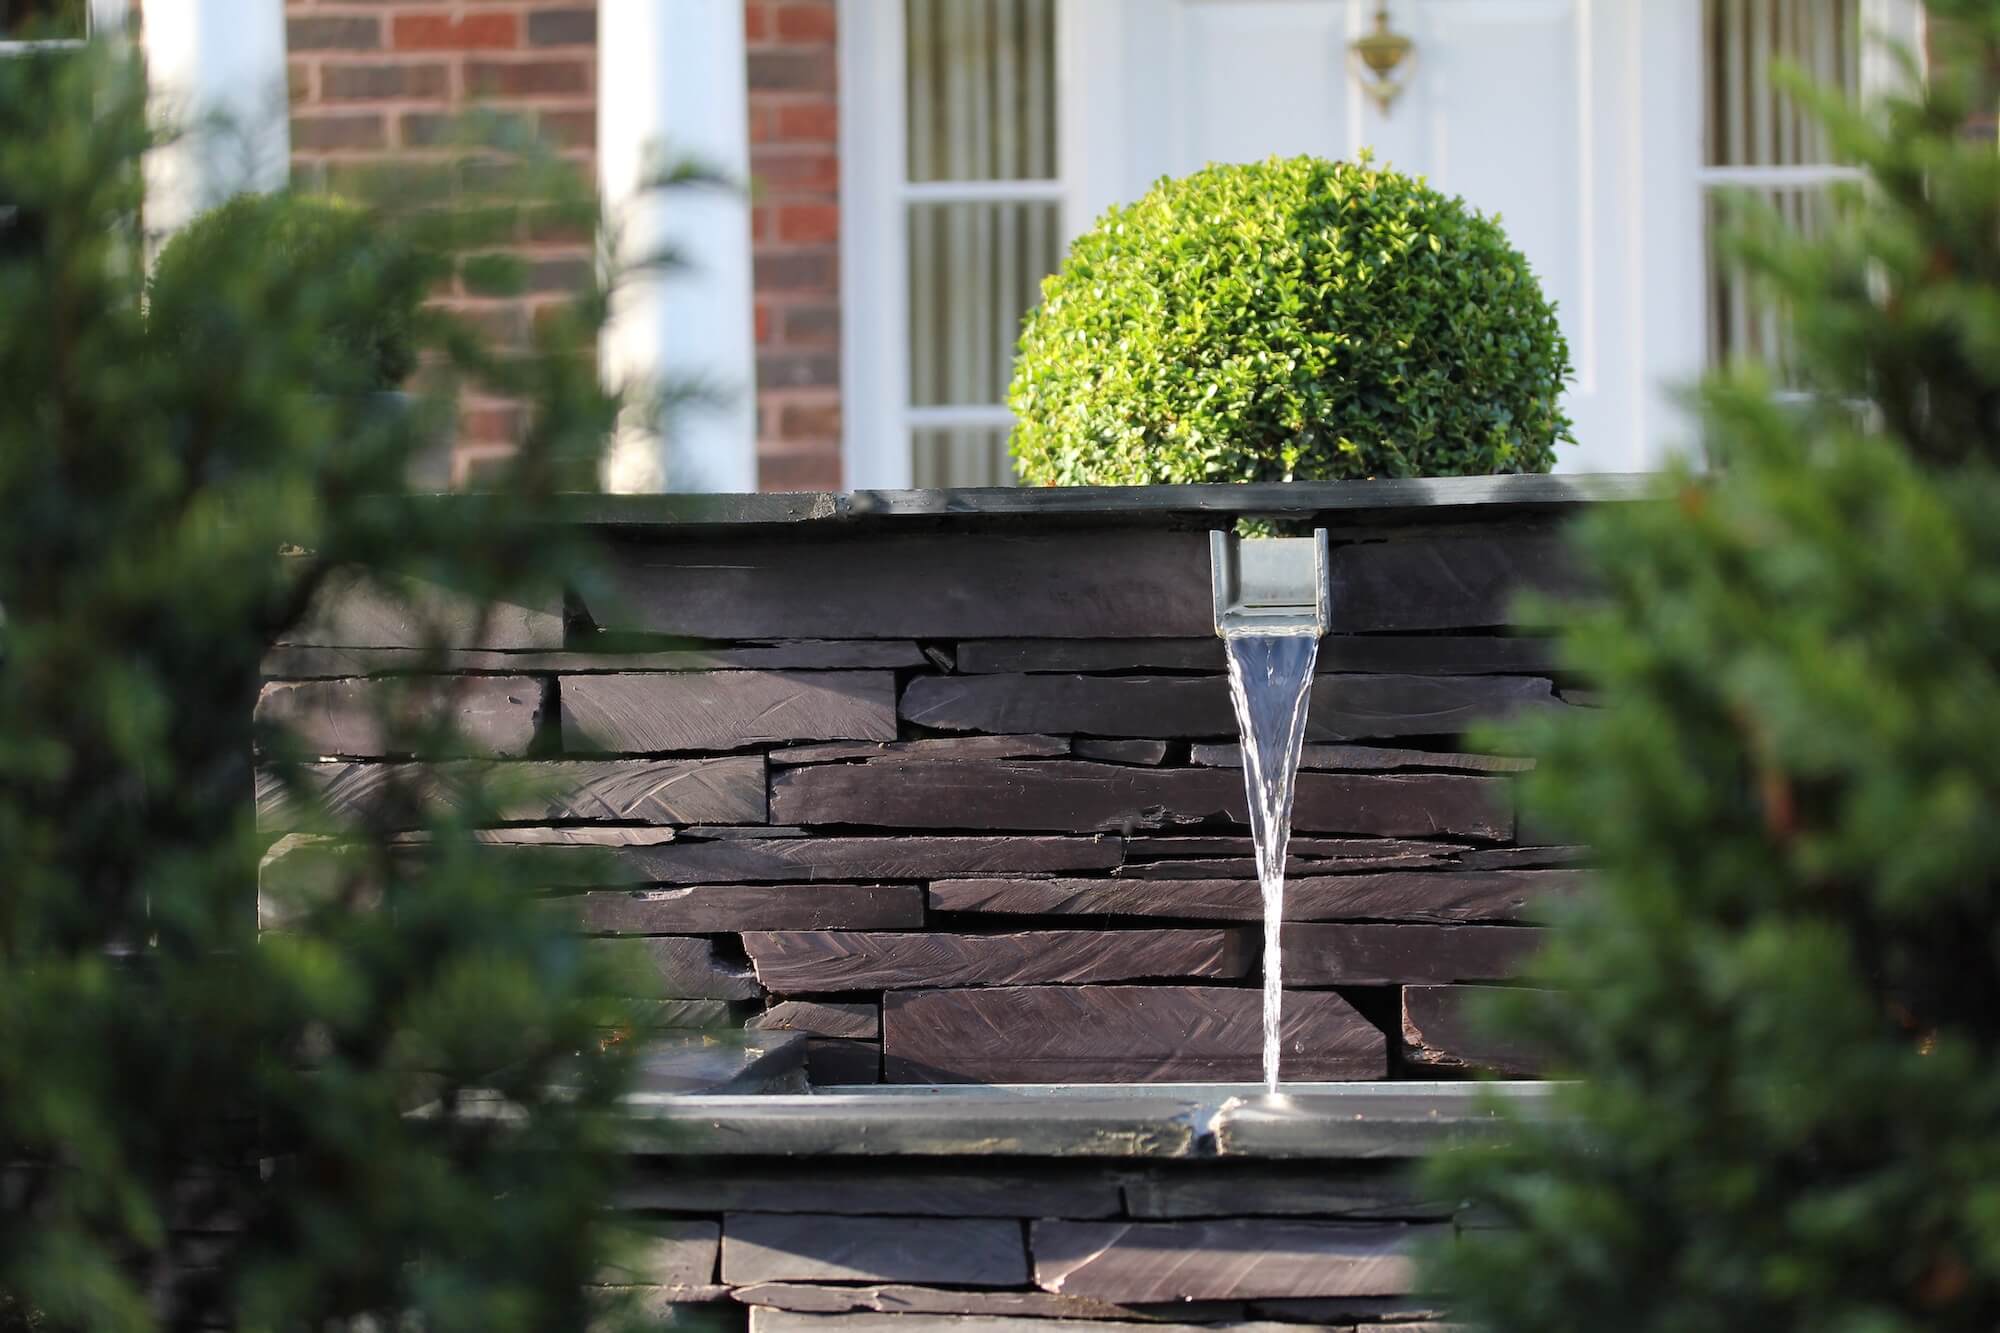 Water feature at front of house